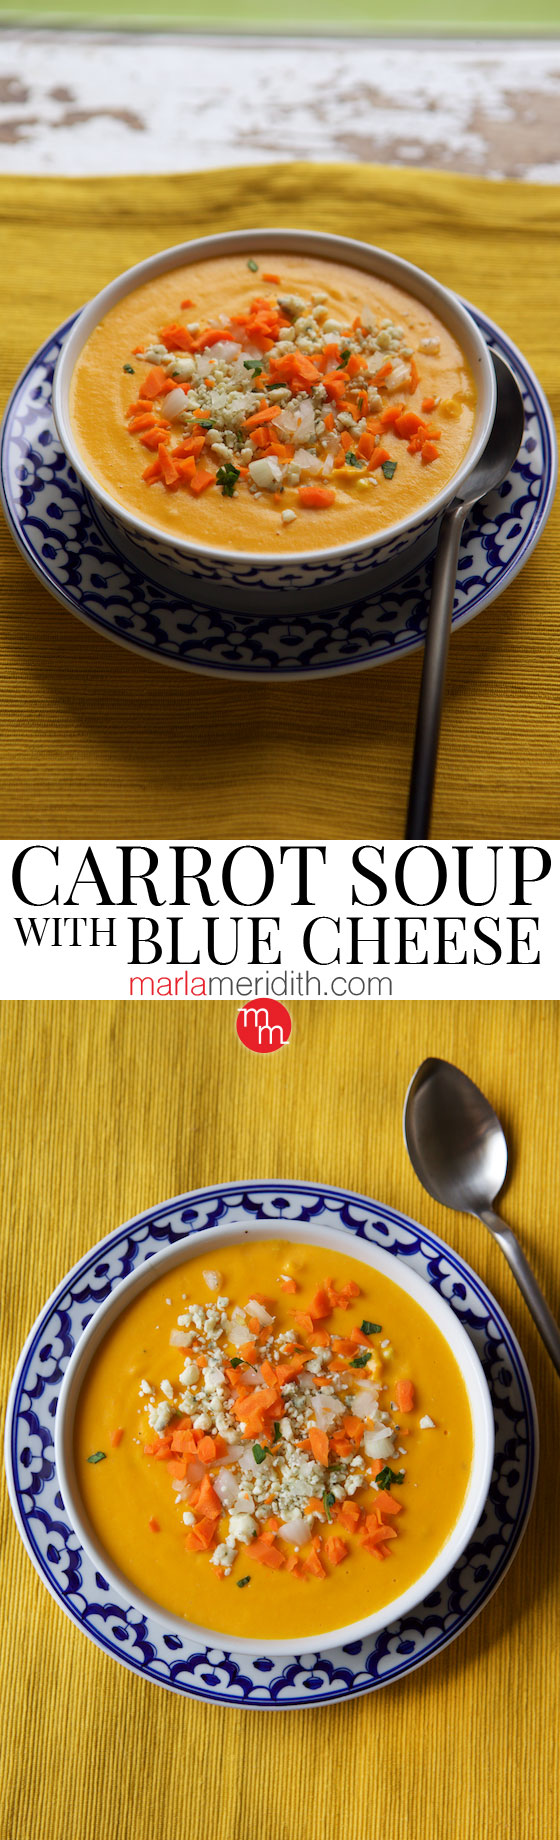 Carrot Soup with Blue Cheese recipe. Make the most of those Farmers Market carrots! MarlaMeridith.com ( @marlameridith )